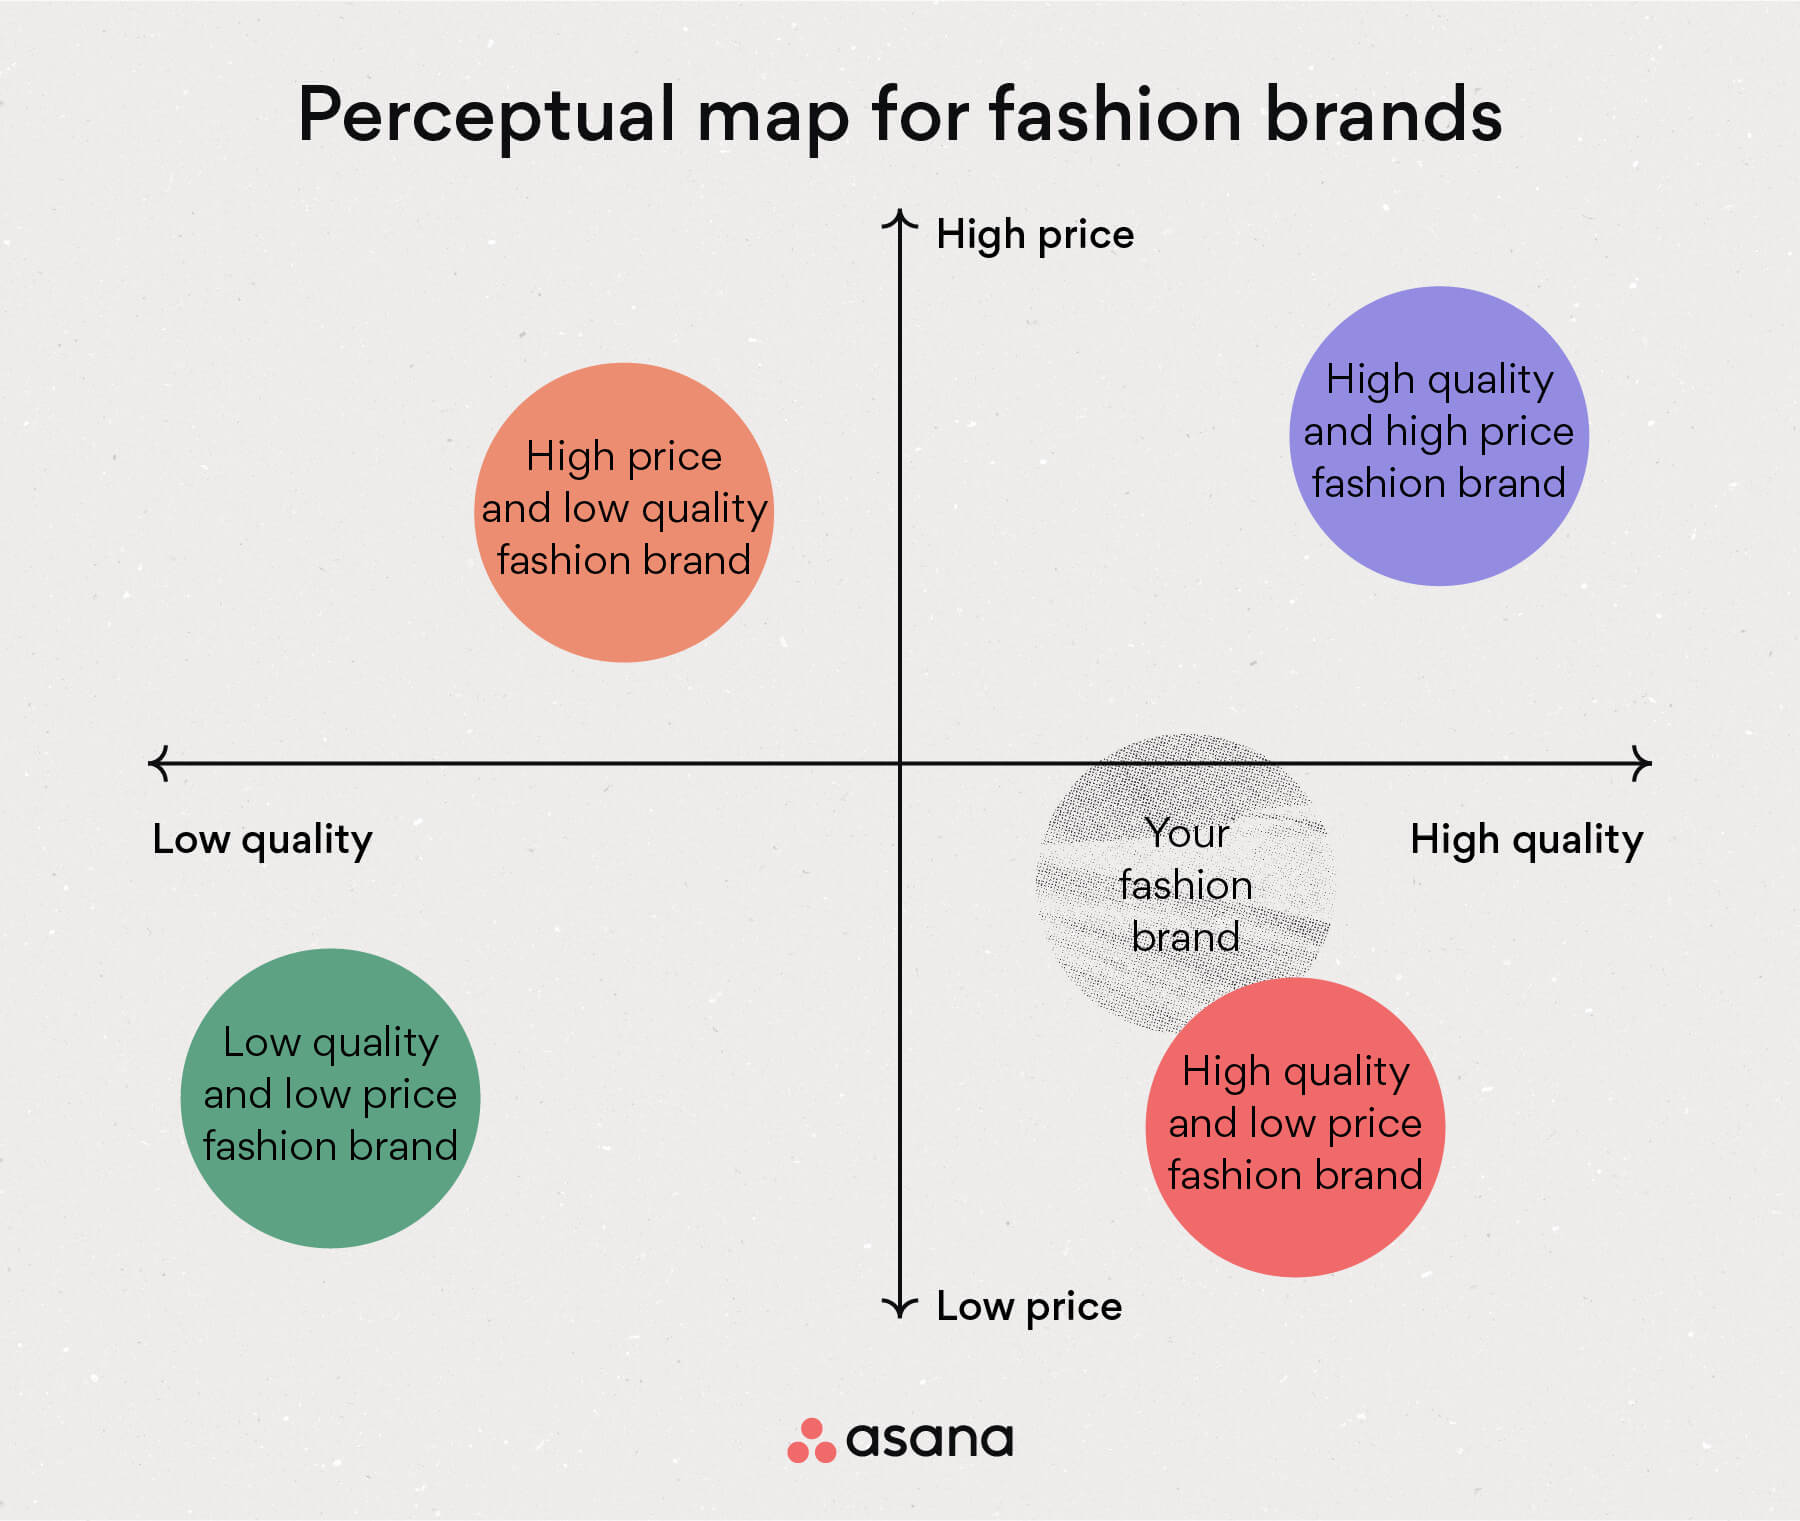 [inline illustration] Perceptual map for fashion brands (example)